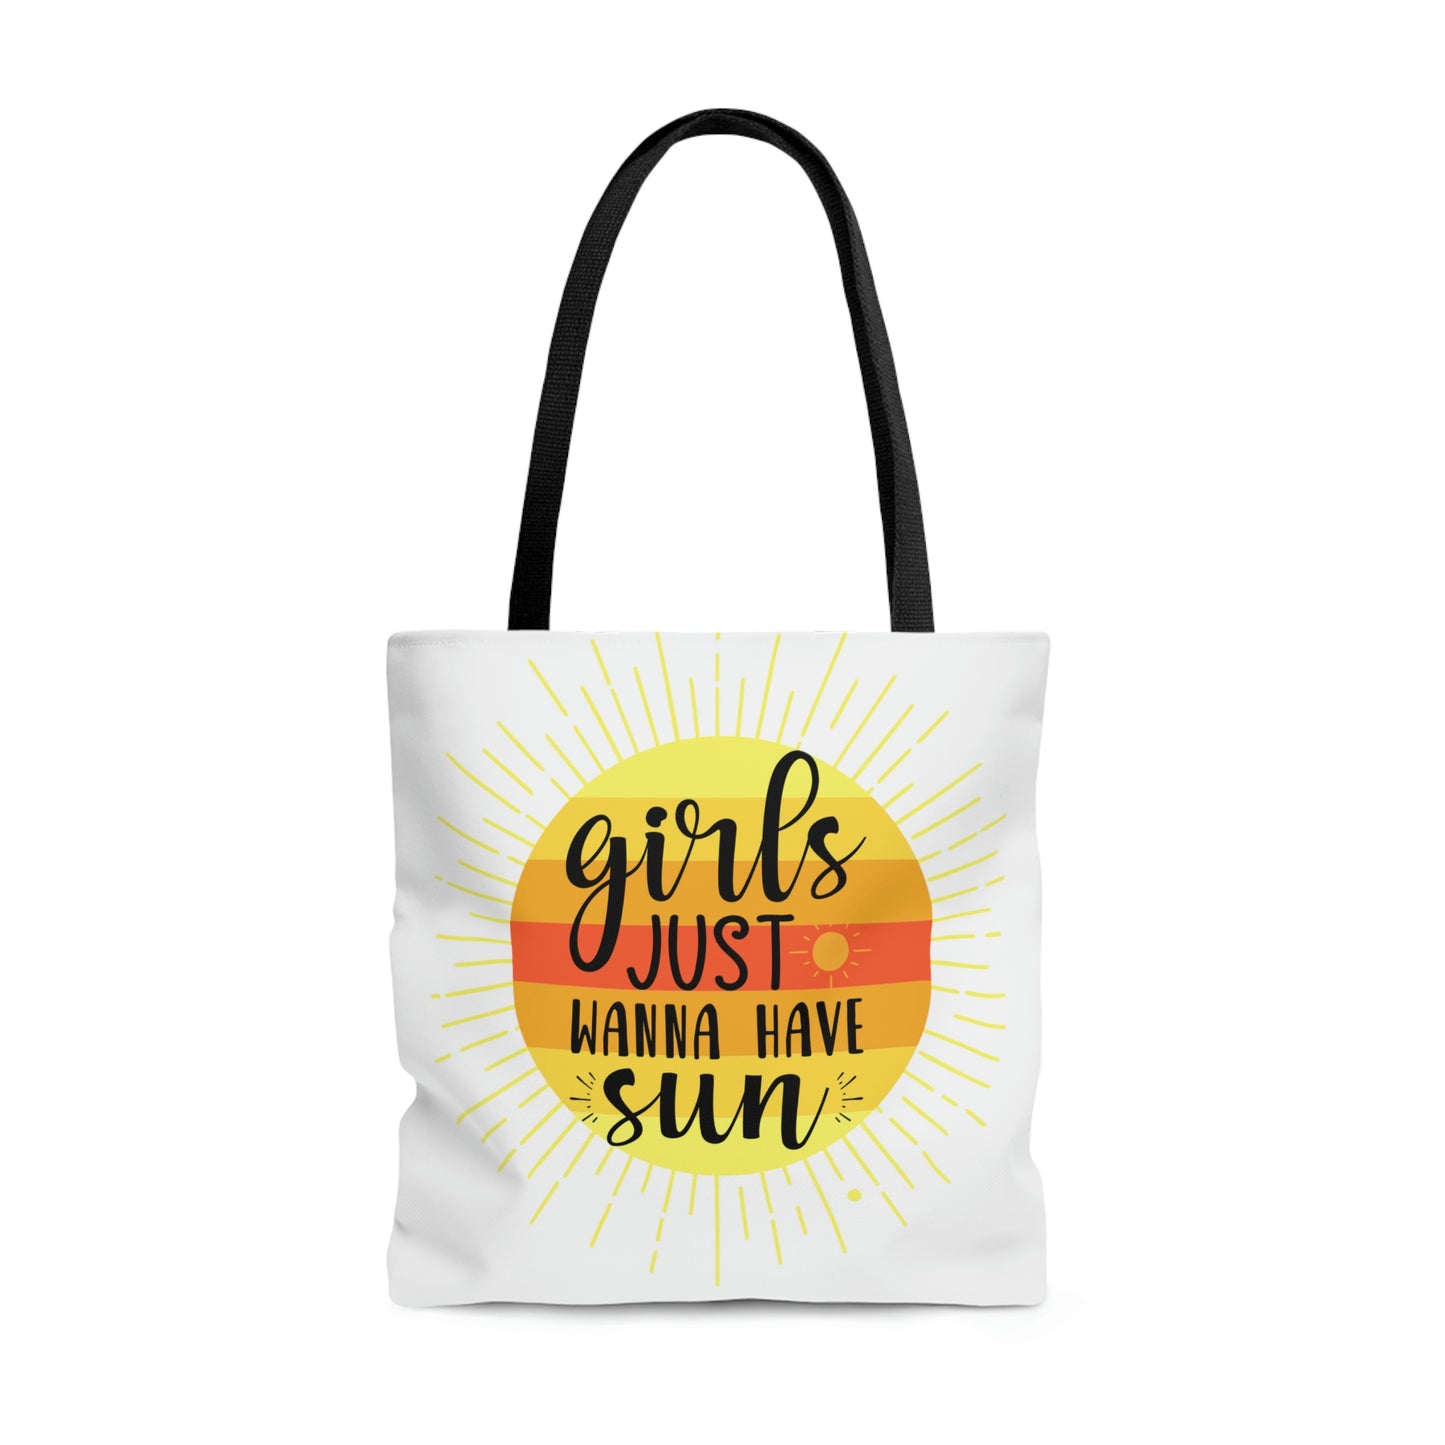 High Quality, All-Over Print Tote Bag, Girls Just Wanna Have Sun, Sunshine Suns Tote Bag